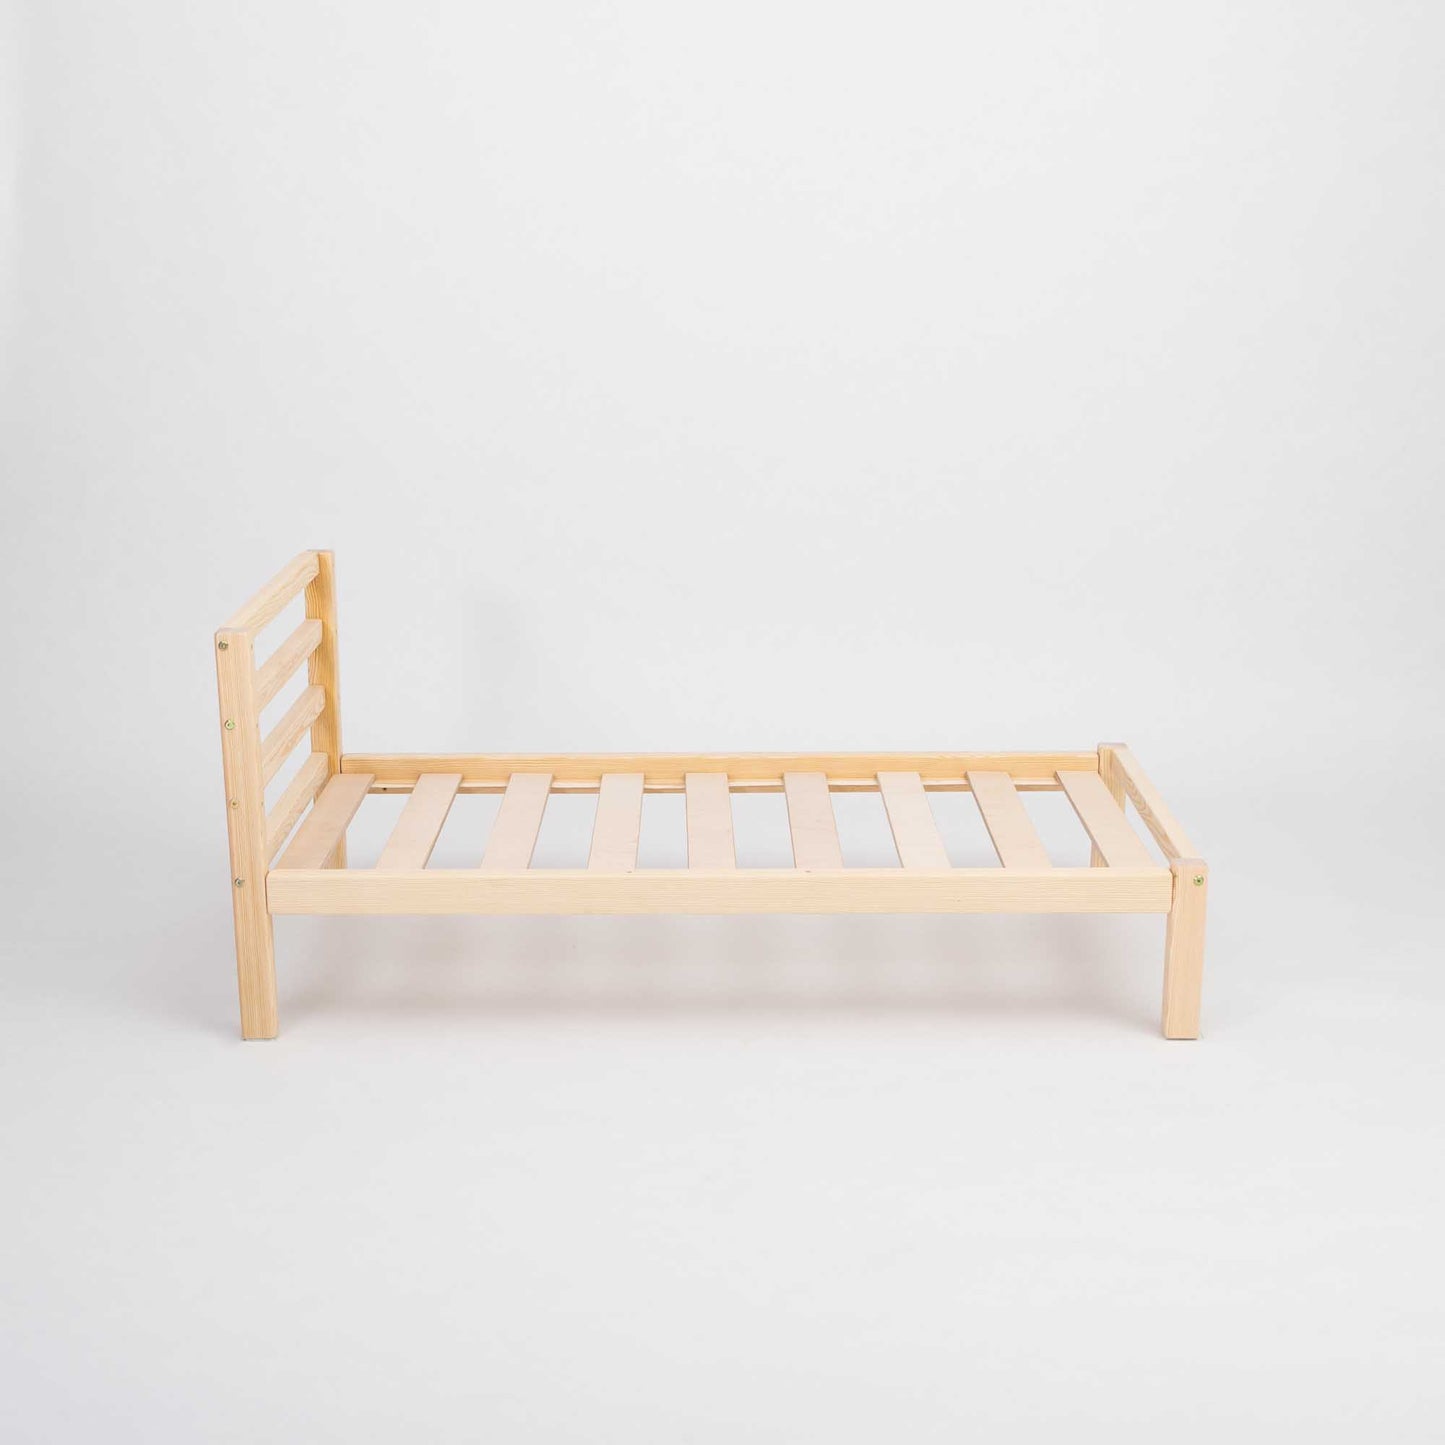 A sturdy "Sweet Home From Wood" kids' bed on legs with a horizontal rail headboard on a white background, perfect for co-sleeping or as a Montessori-inspired toddler bed.